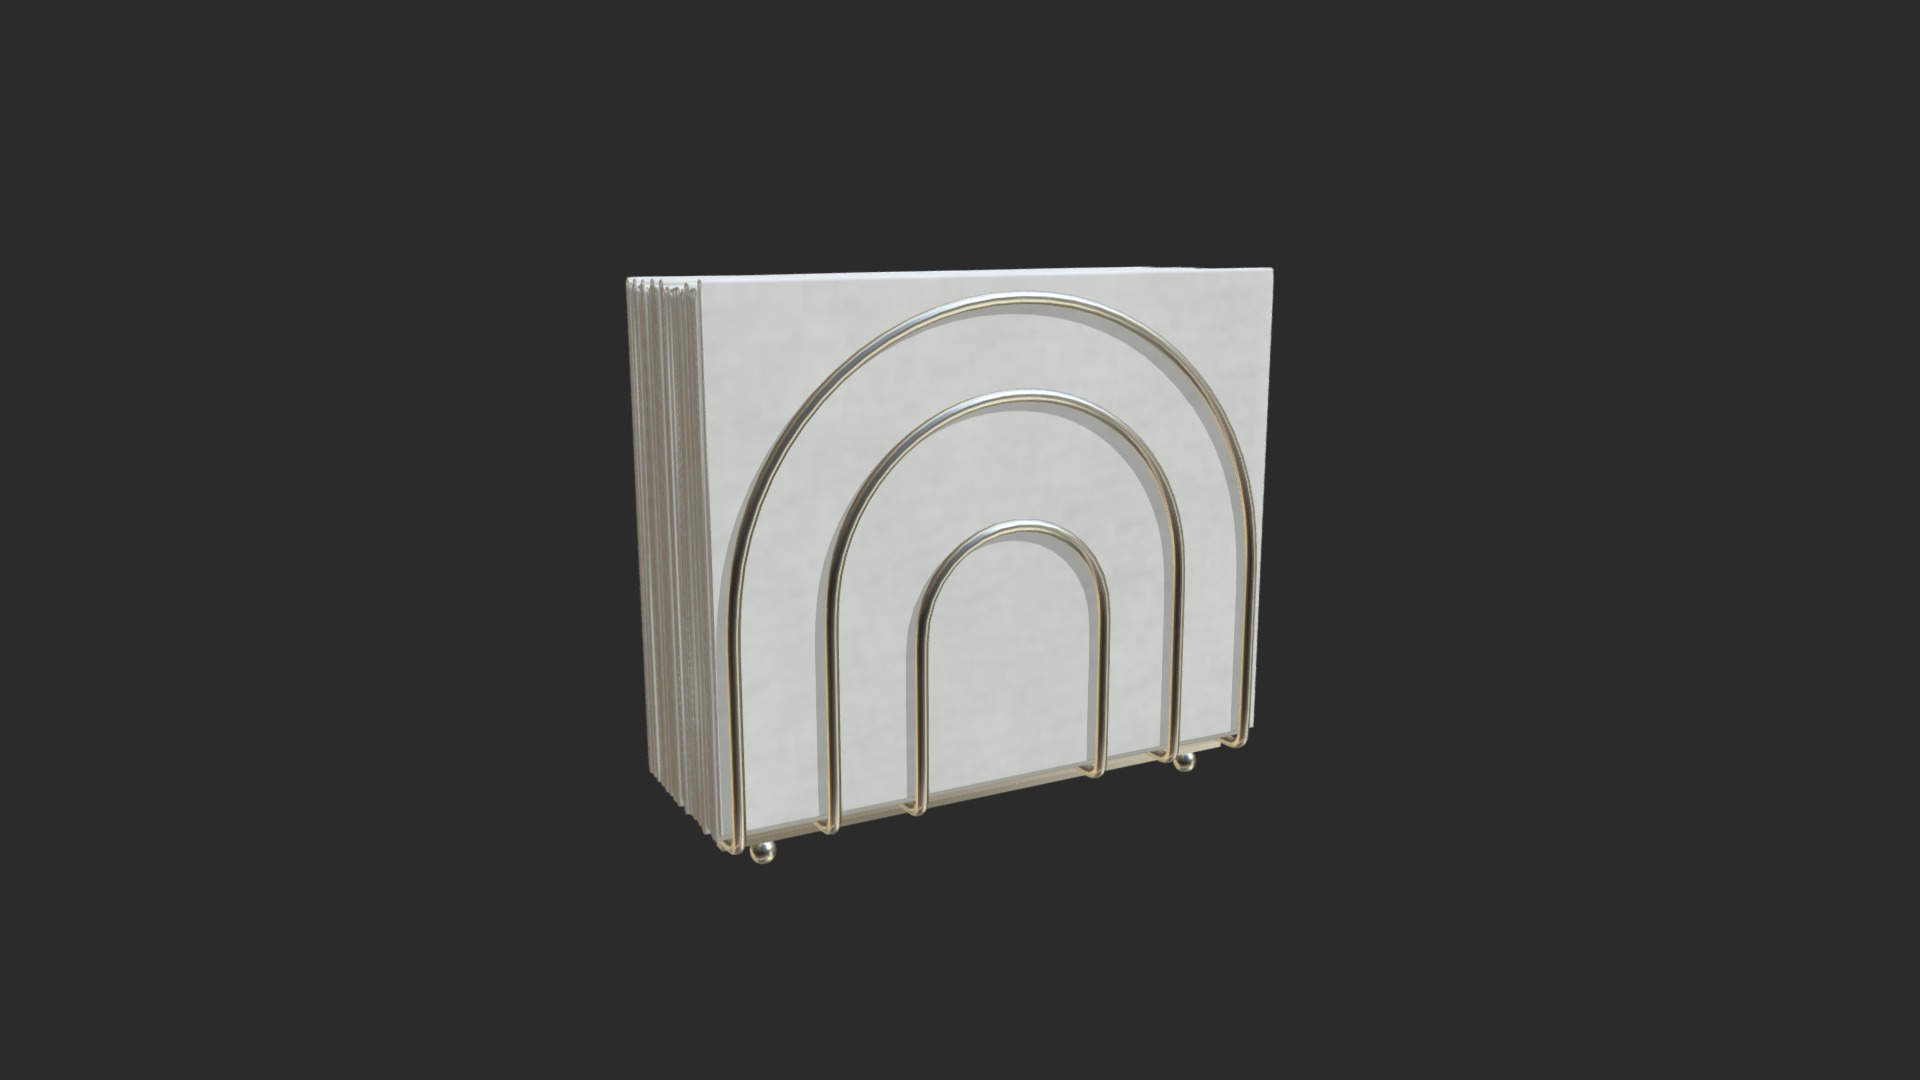 3D model Napkin holder 1 - This is a 3D model of the Napkin holder 1. The 3D model is about a white door with a black background.